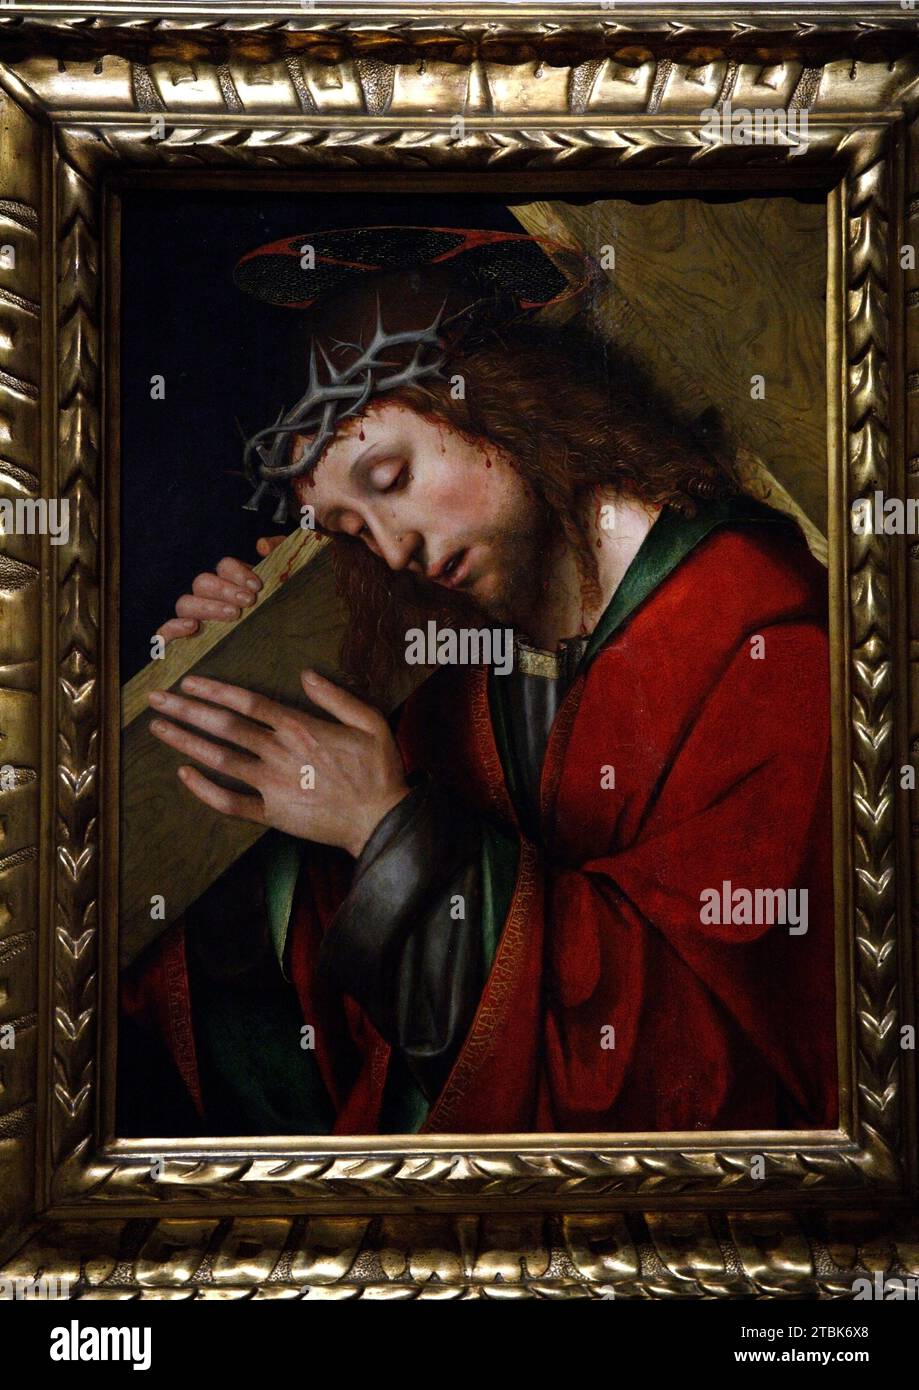 Italy Modena Galleria Estense - Christ carrying the cross by Giovanni Vincenzo Maineri 1474 - 1513 Stock Photo